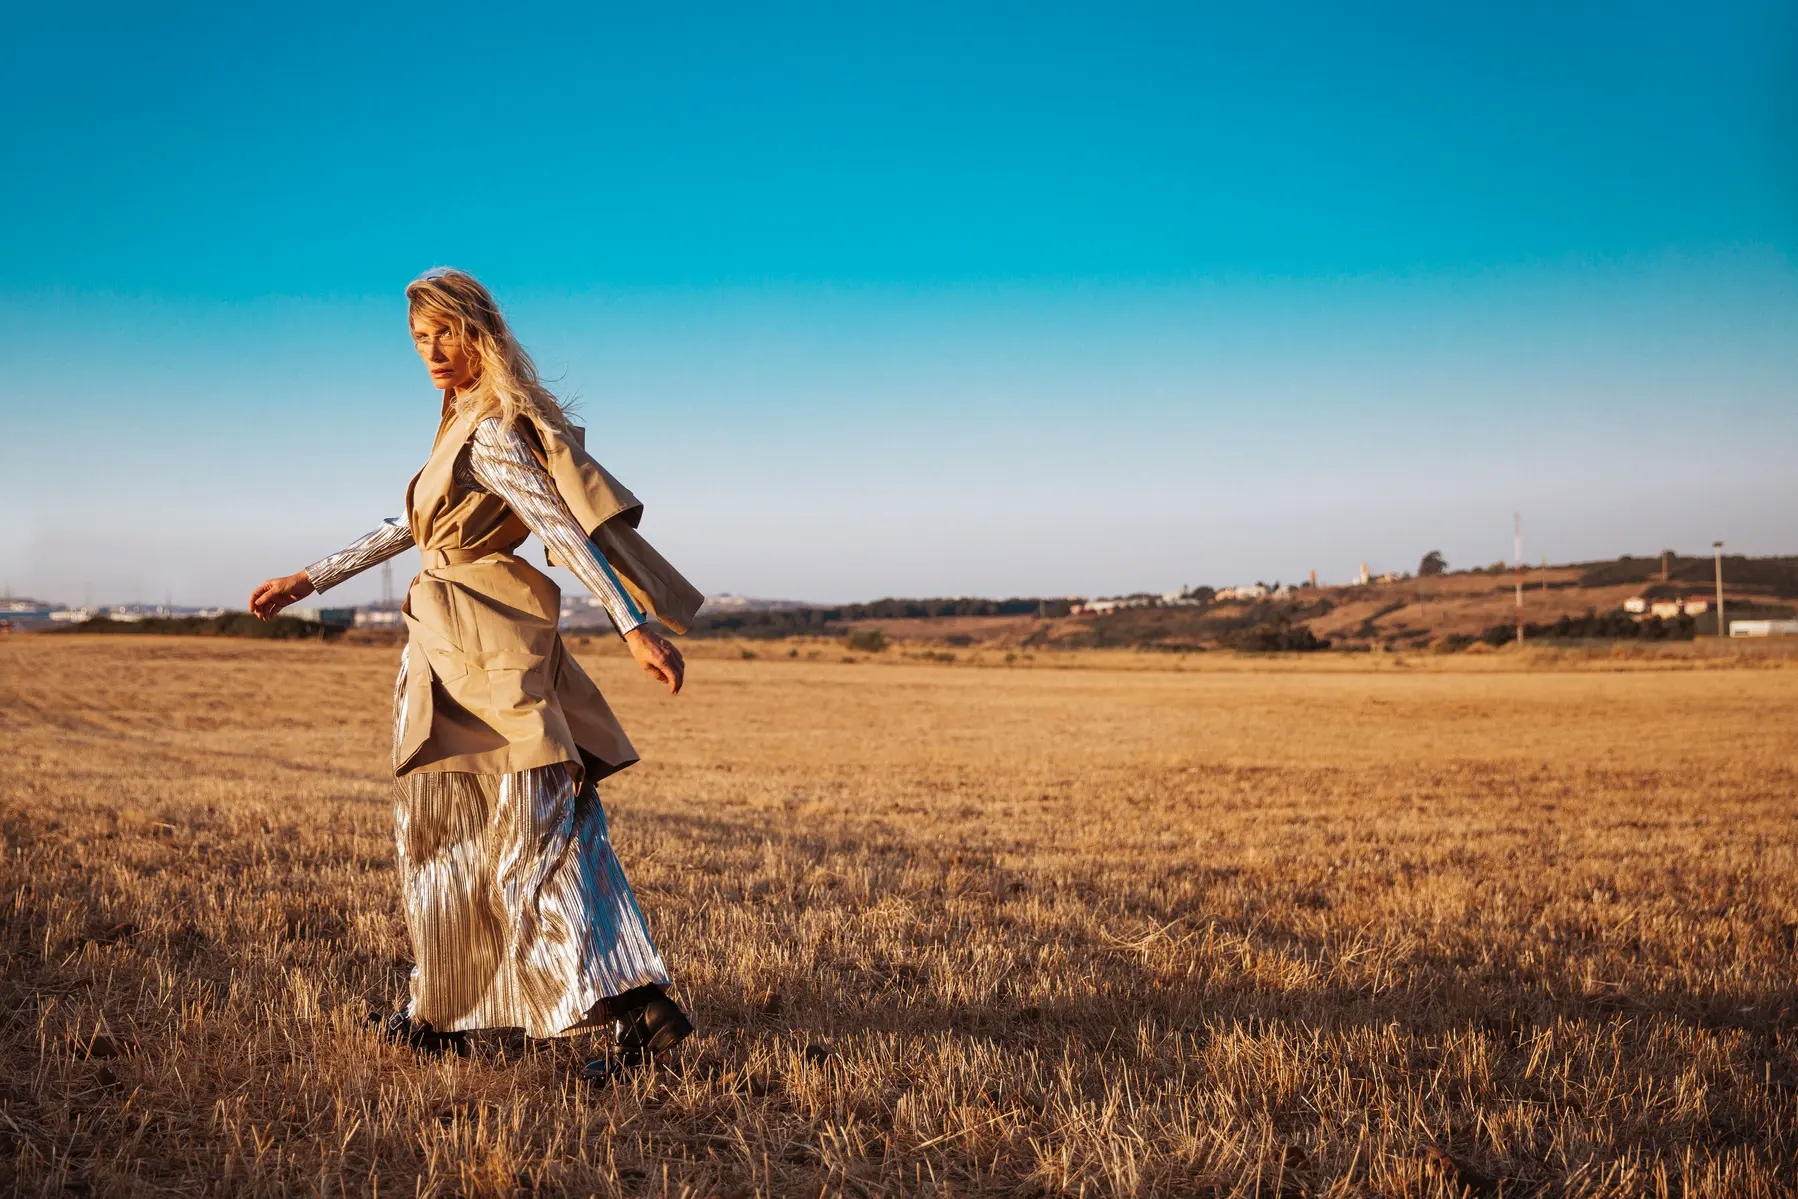 Astrid Werdnig in a long dress walking through a field, being photographed by KAT V Photography.